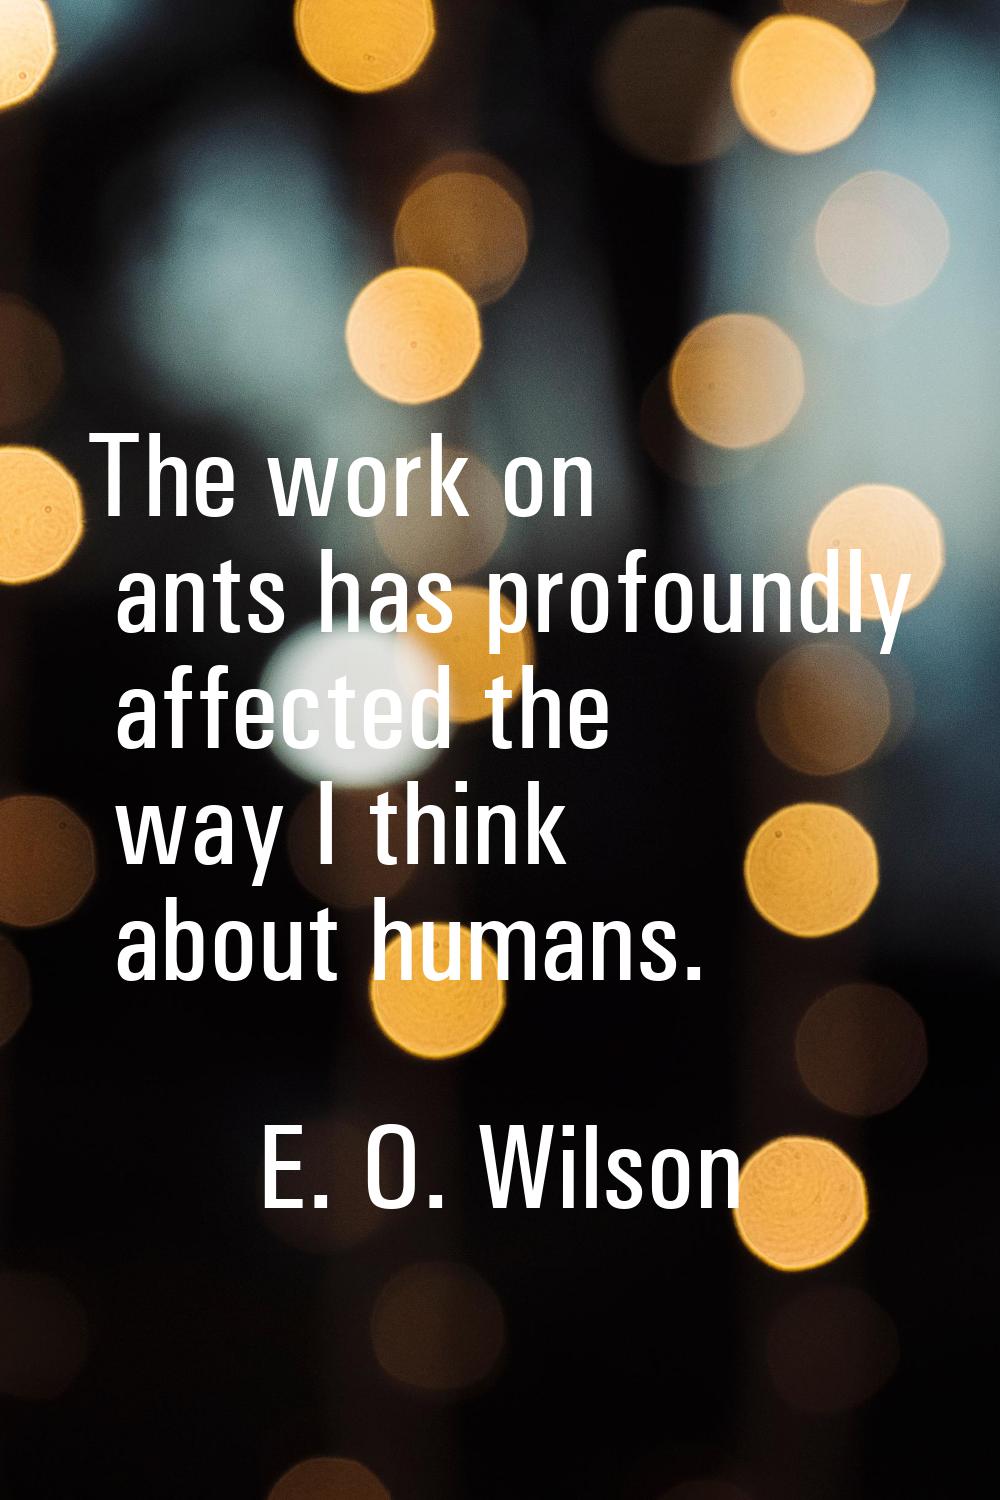 The work on ants has profoundly affected the way I think about humans.